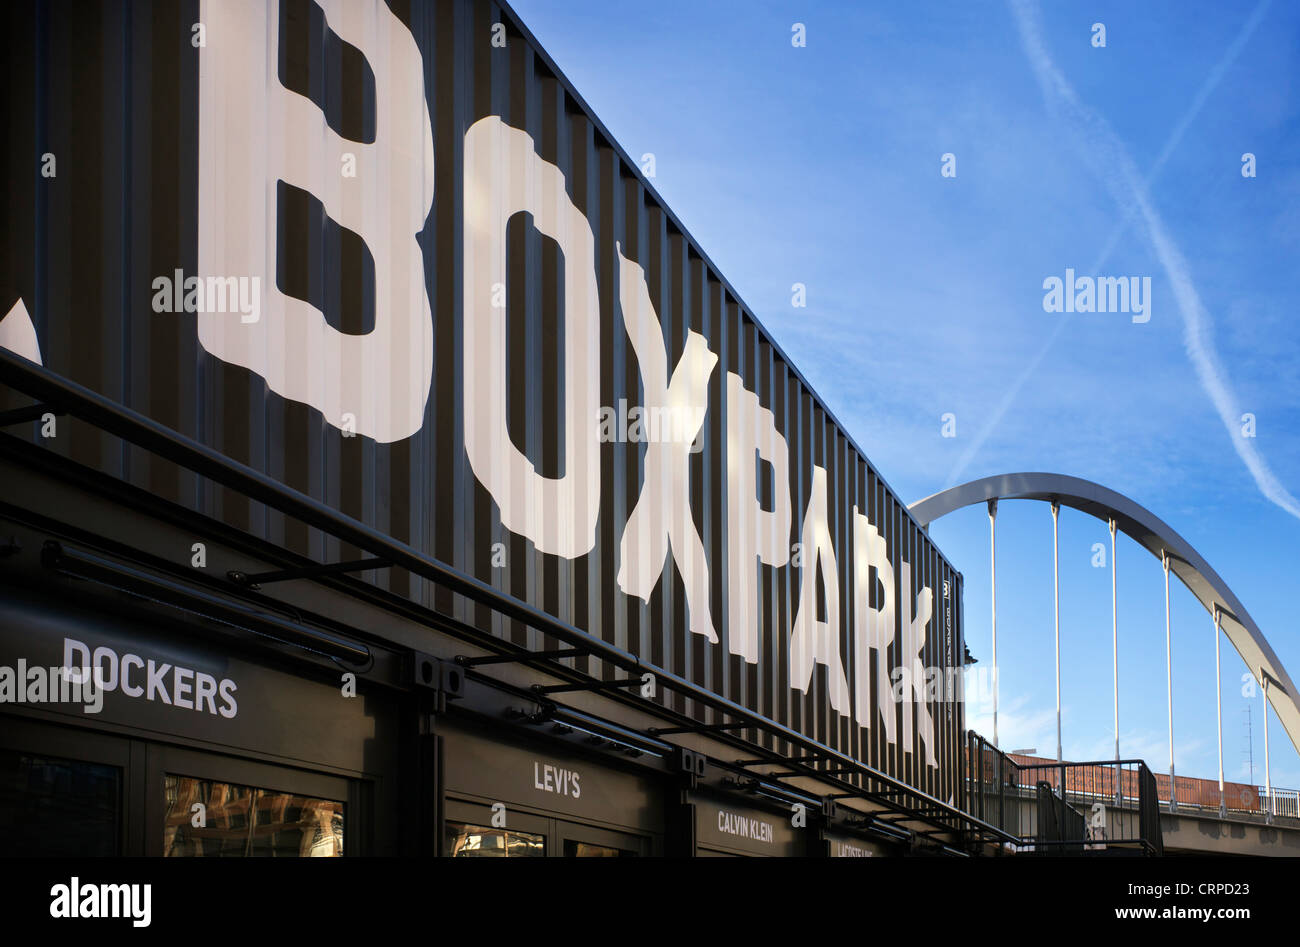 Boxpark in Shoreditch, a pop-up shopping mall formed from shipping containers refitted to create low cost 'box shops'. Stock Photo